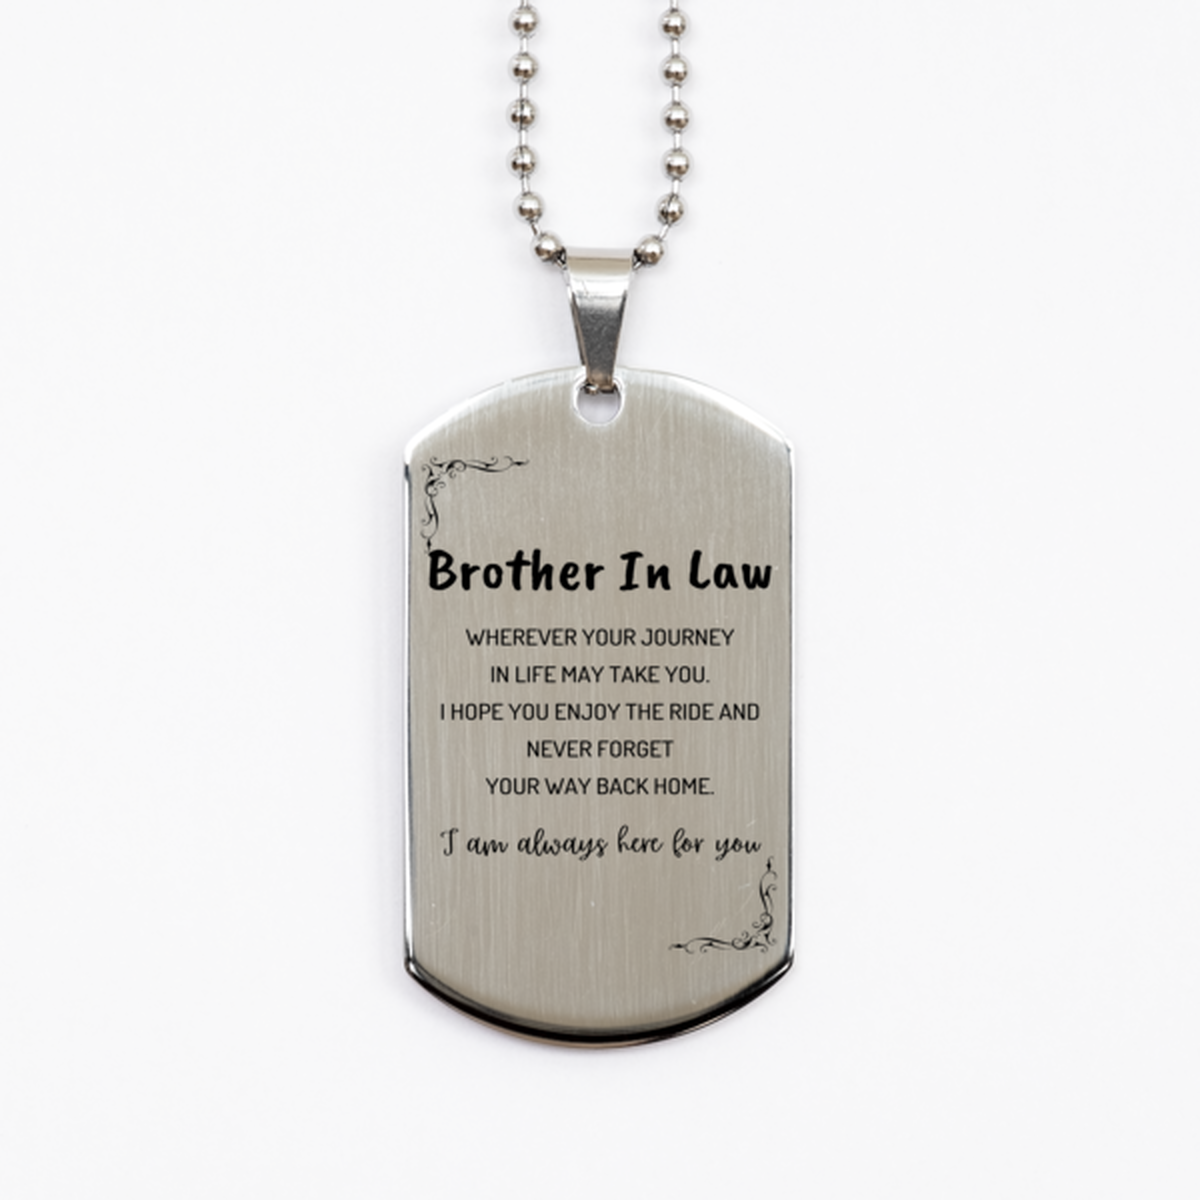 Brother In Law wherever your journey in life may take you, I am always here for you Brother In Law Silver Dog Tag, Awesome Christmas Gifts For Brother In Law, Brother In Law Birthday Gifts for Men Women Family Loved One